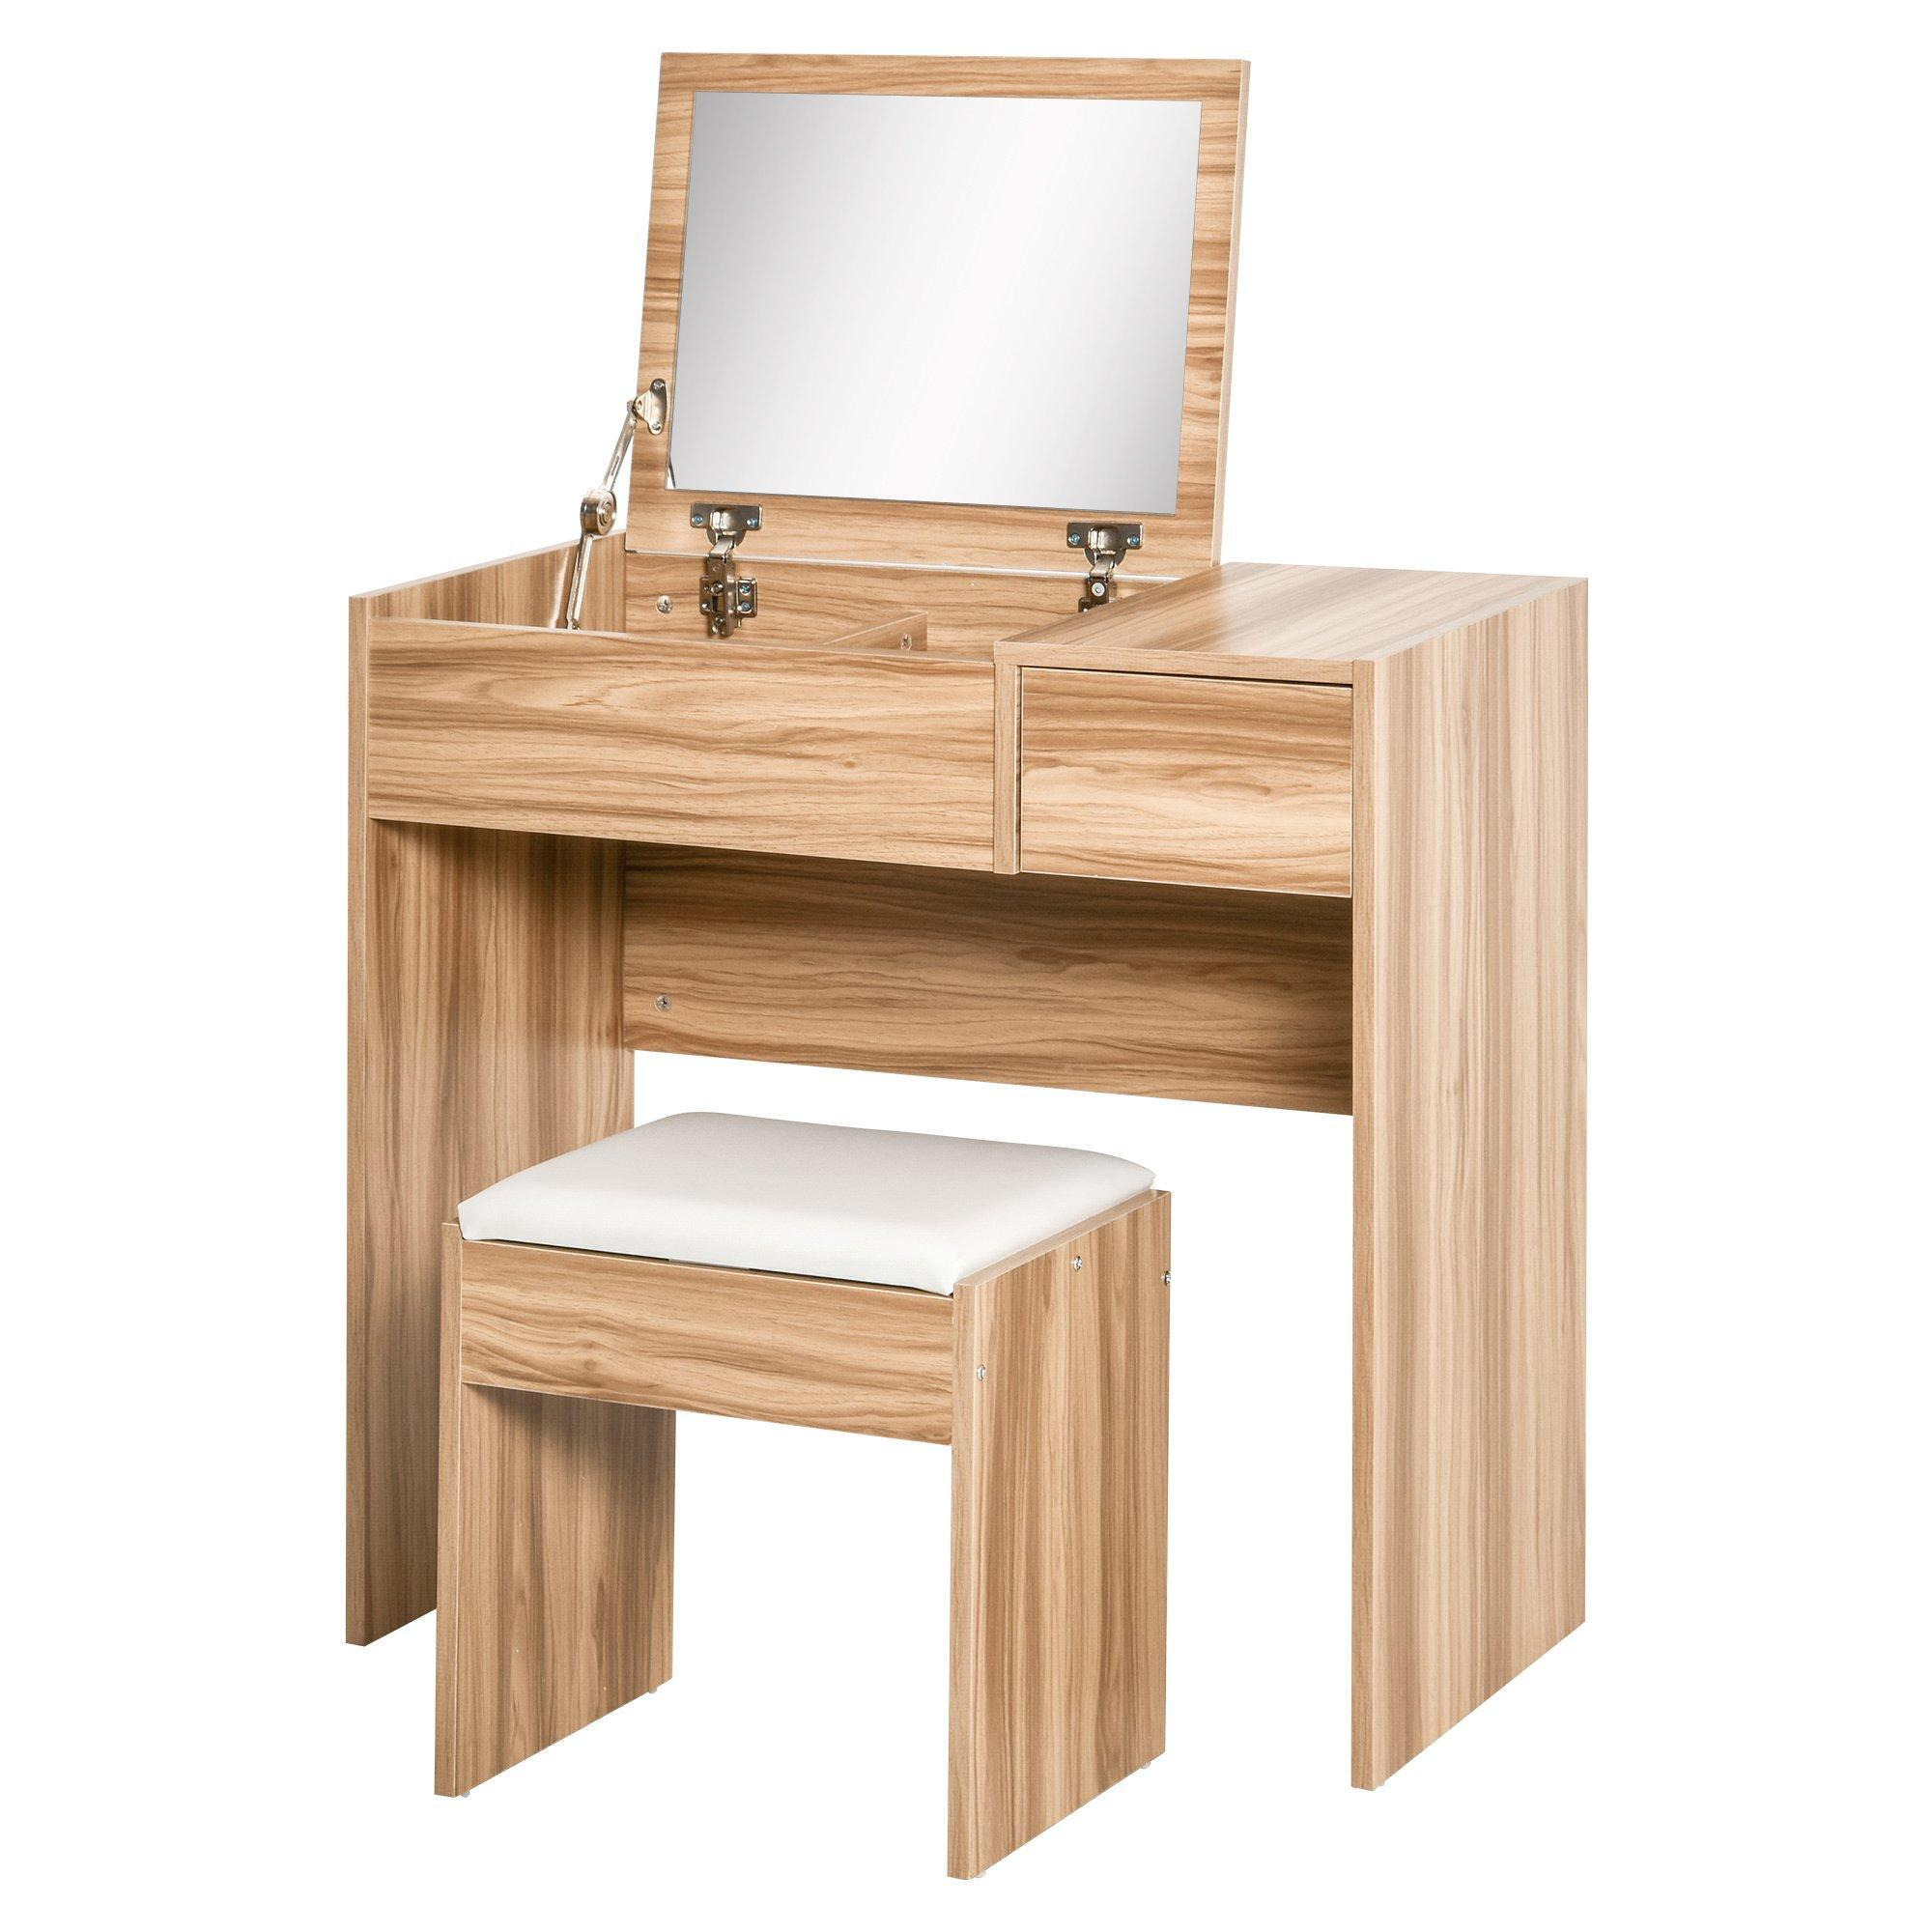 Dressing Table Set with Flip up Mirror Padded Stool Dresser - image 1